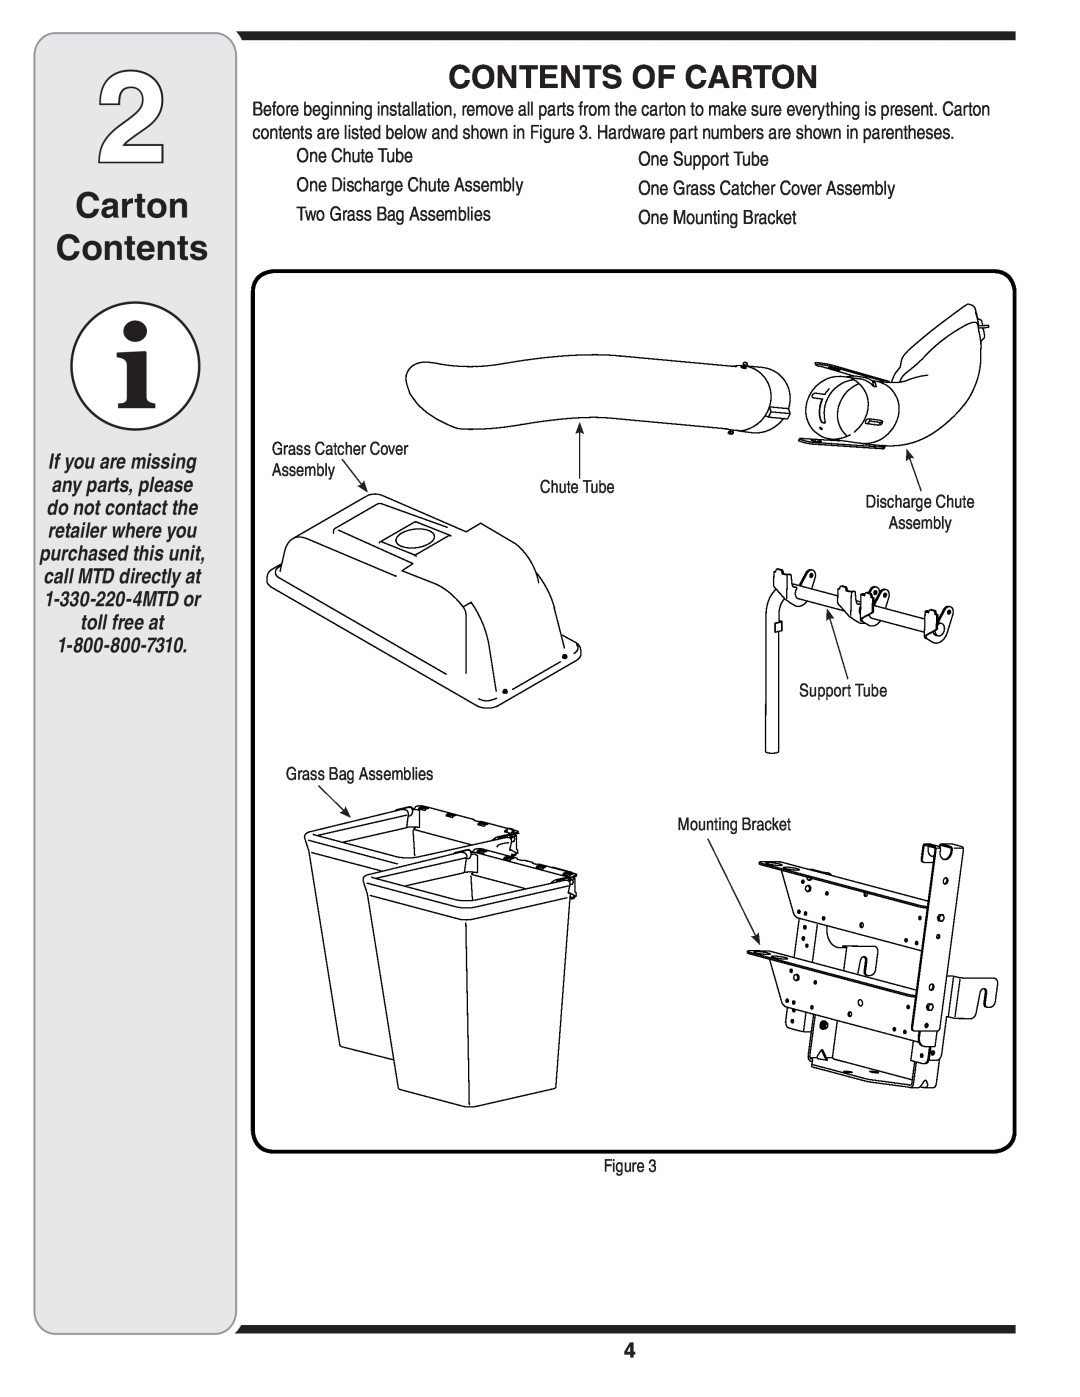 MTD OHD 190-180 warranty Carton Contents, Contents Of Carton, toll free at, One Chute Tube 